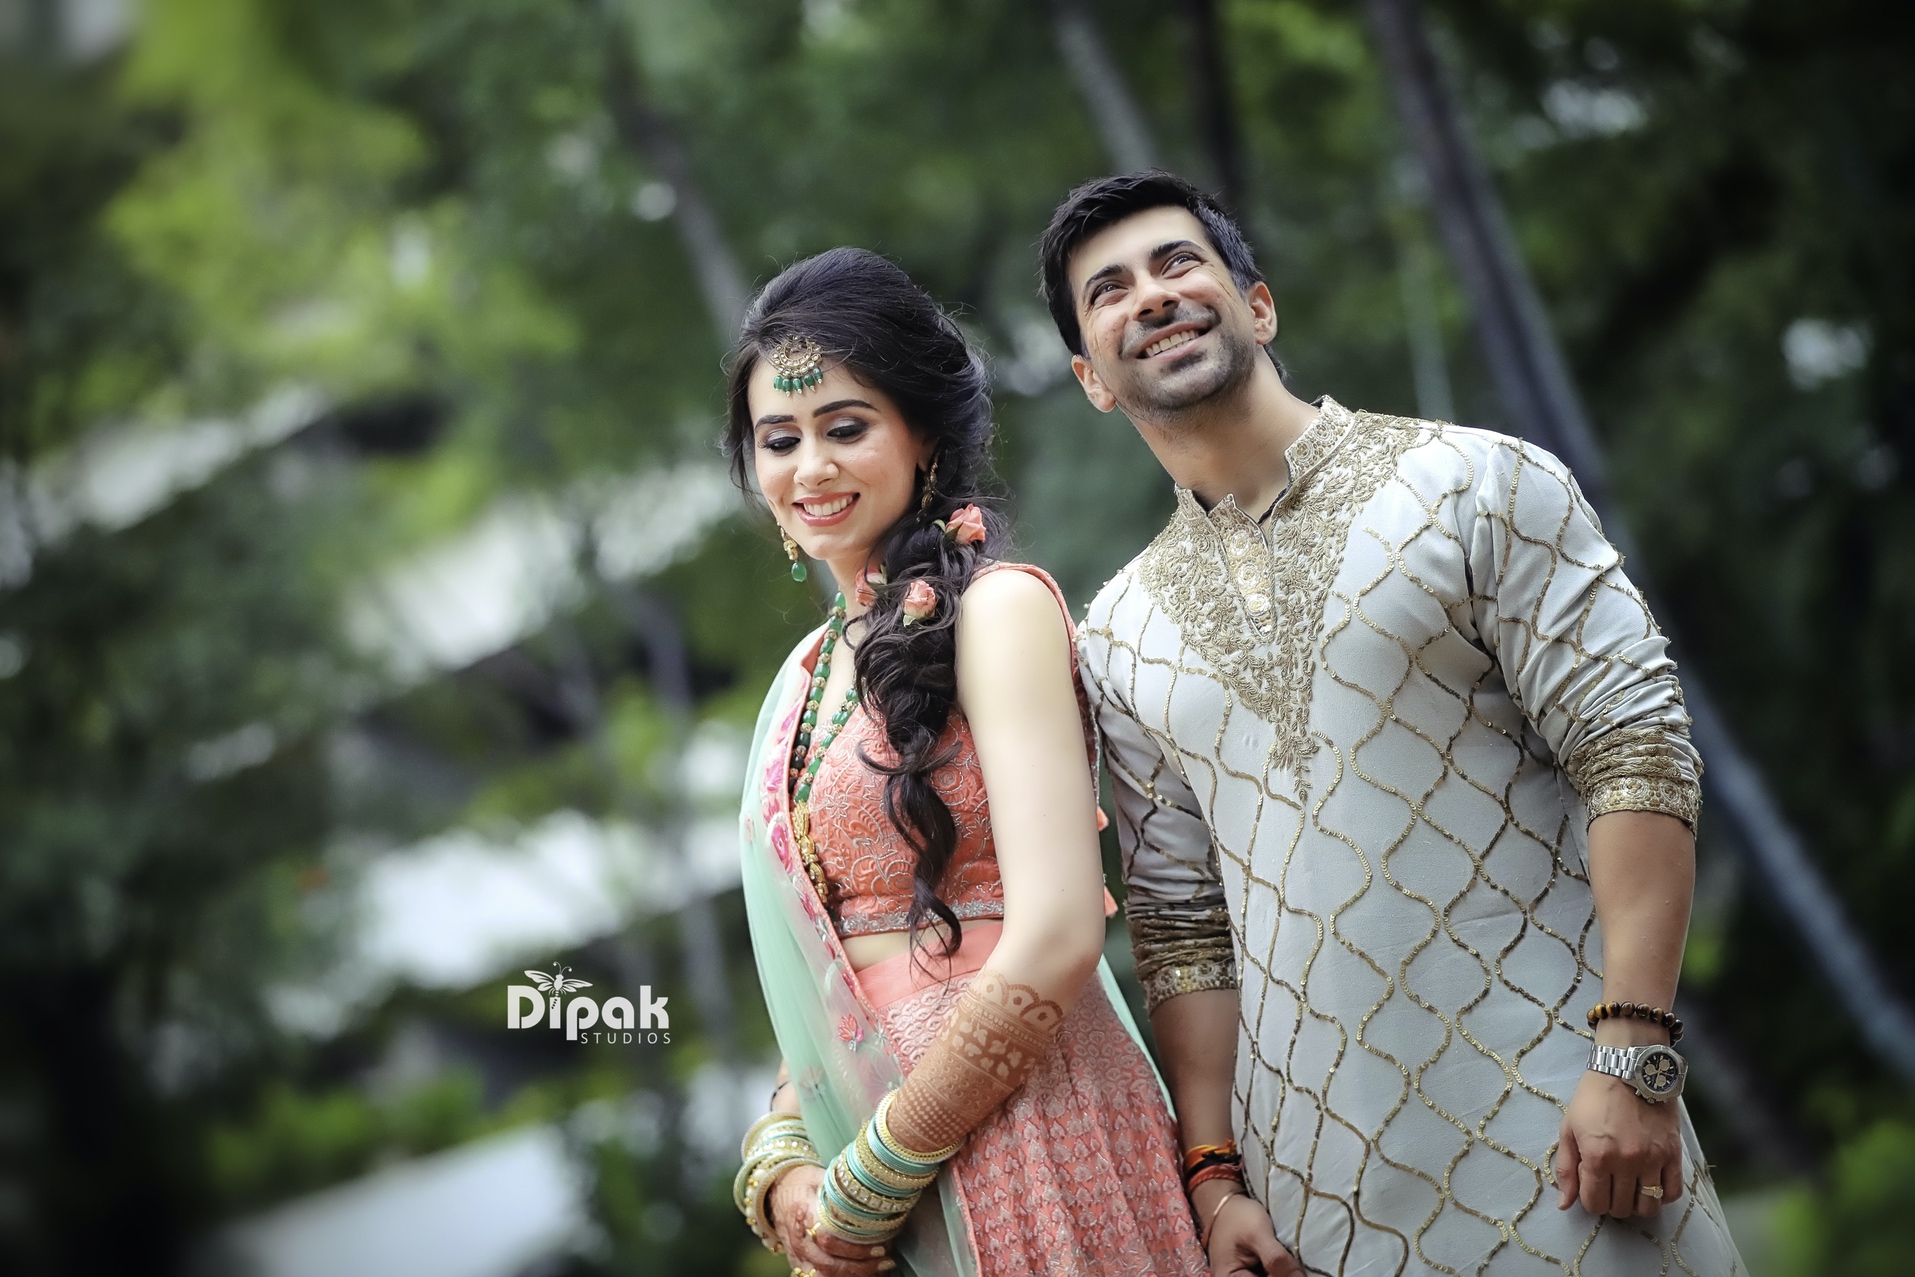 Holding each other | Bride photos poses, Indian bride photography poses,  Indian wedding poses